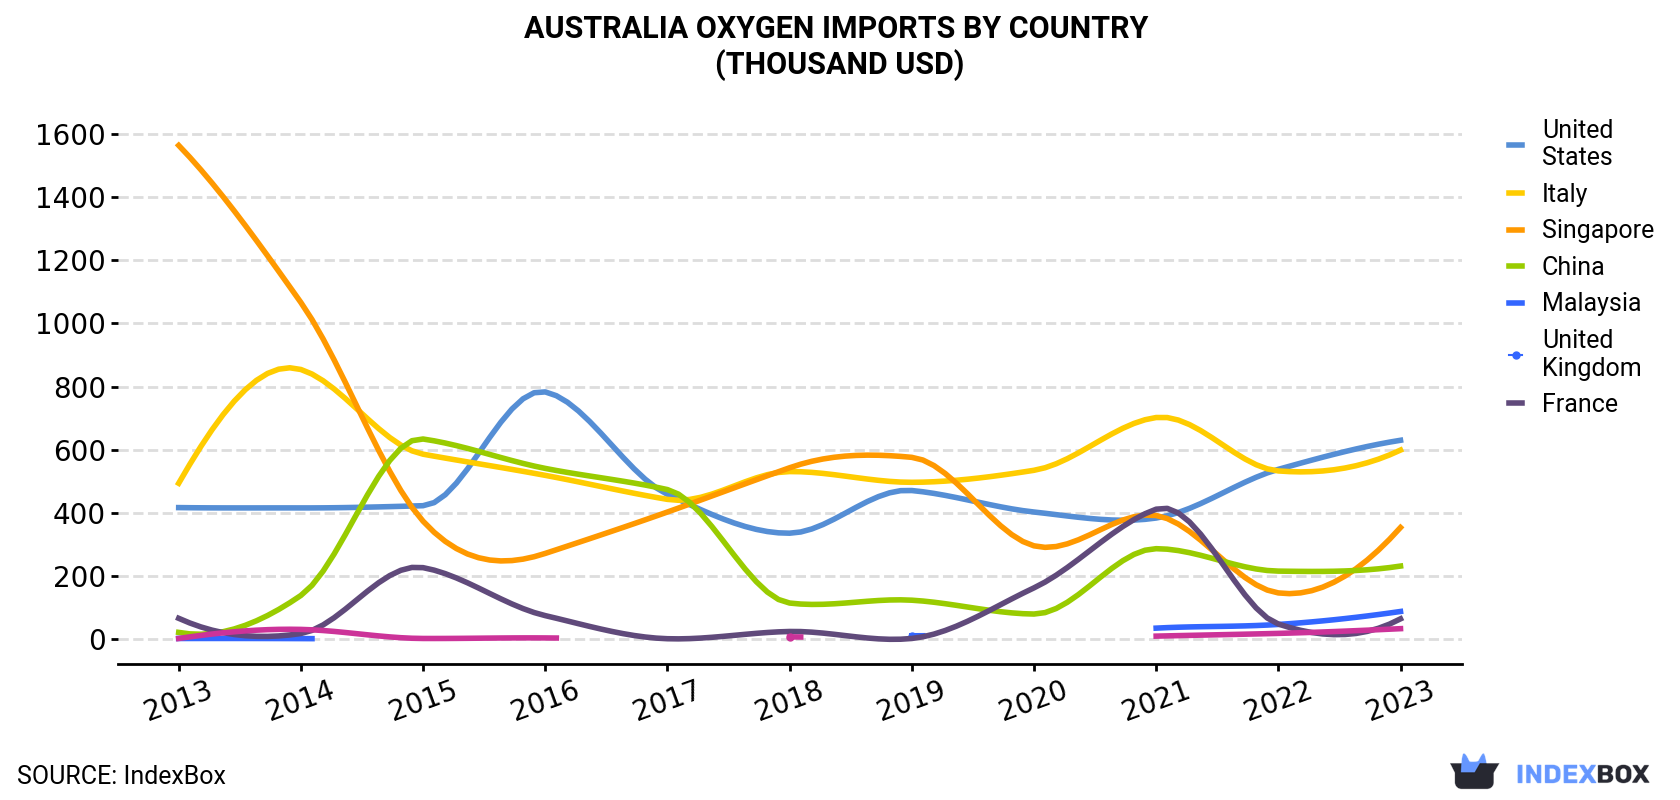 Australia Oxygen Imports By Country (Thousand USD)